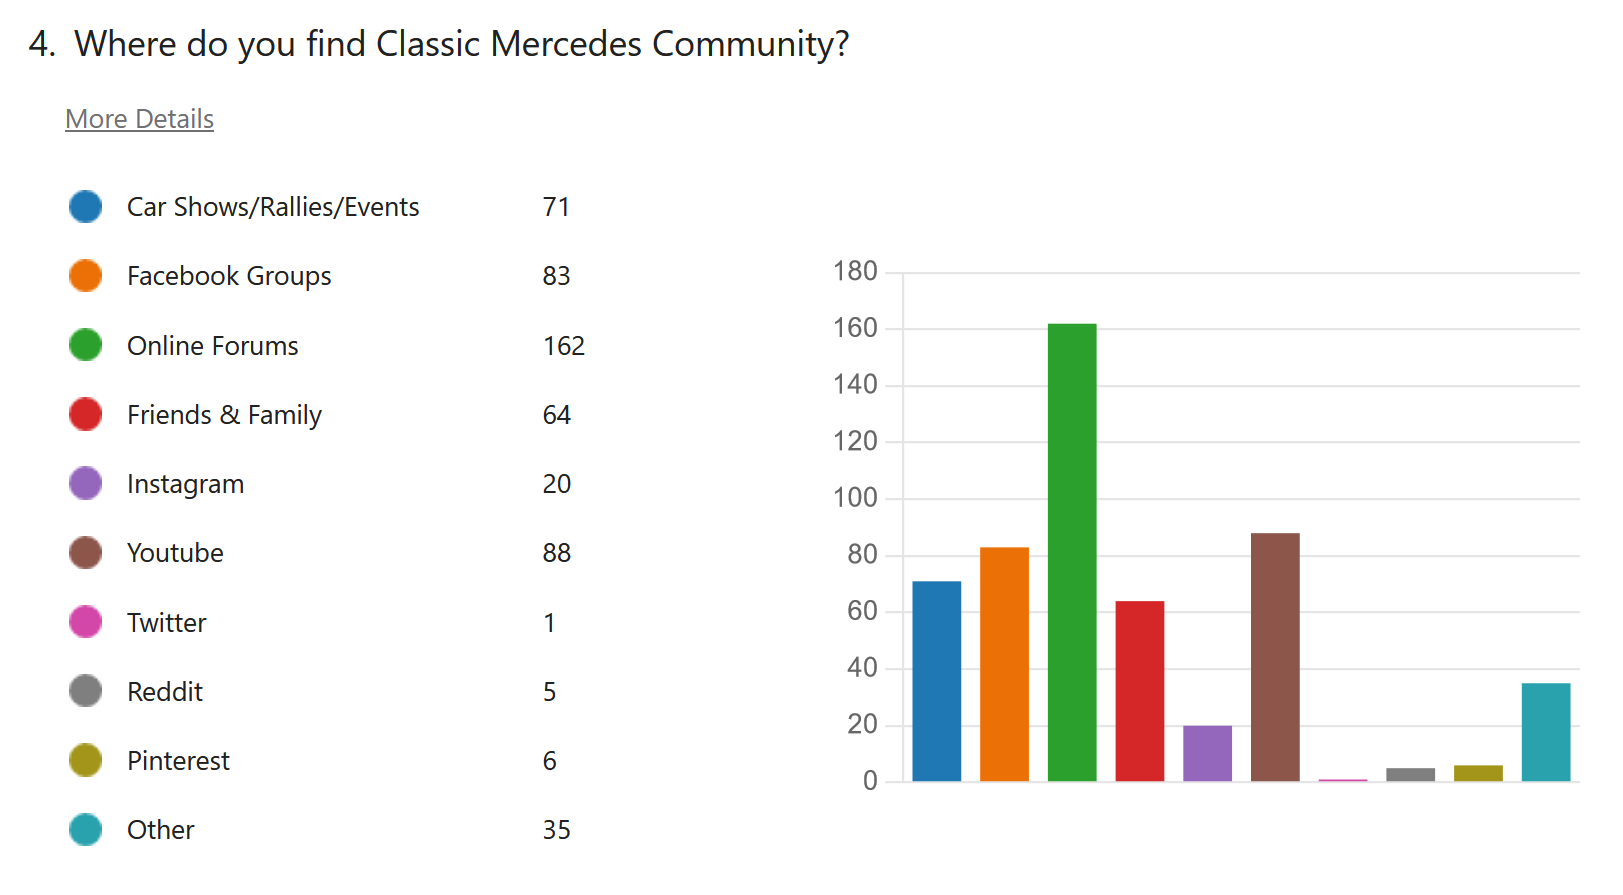 Where do you find Classic Mercedes Community?